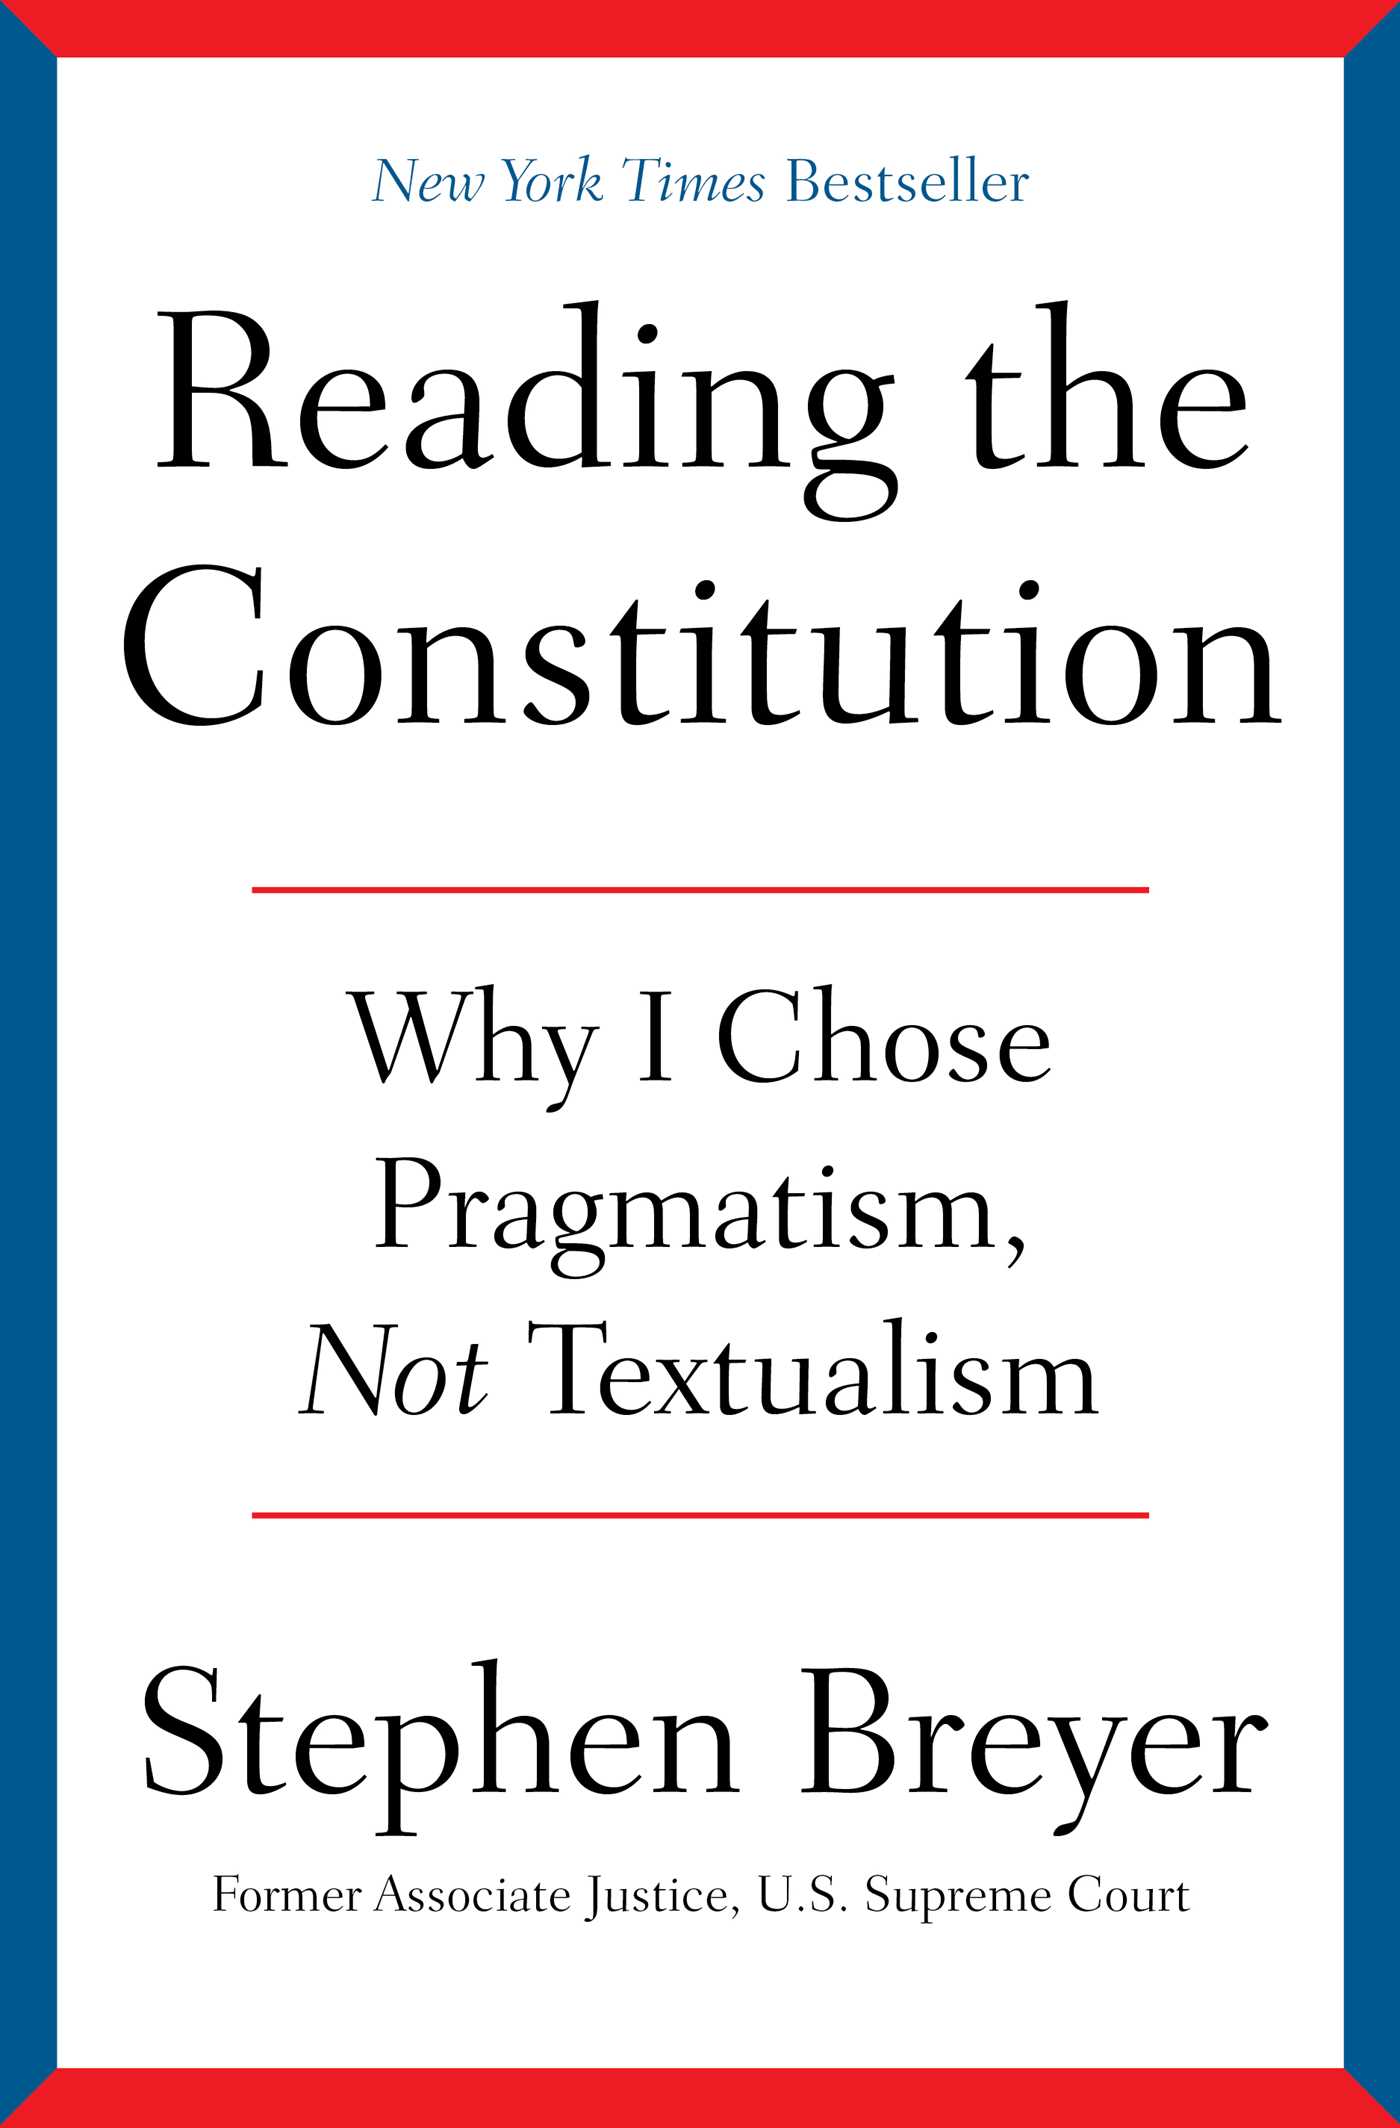 Image de couverture de Reading the Constitution [electronic resource] : Why I Chose Pragmatism, Not Textualism